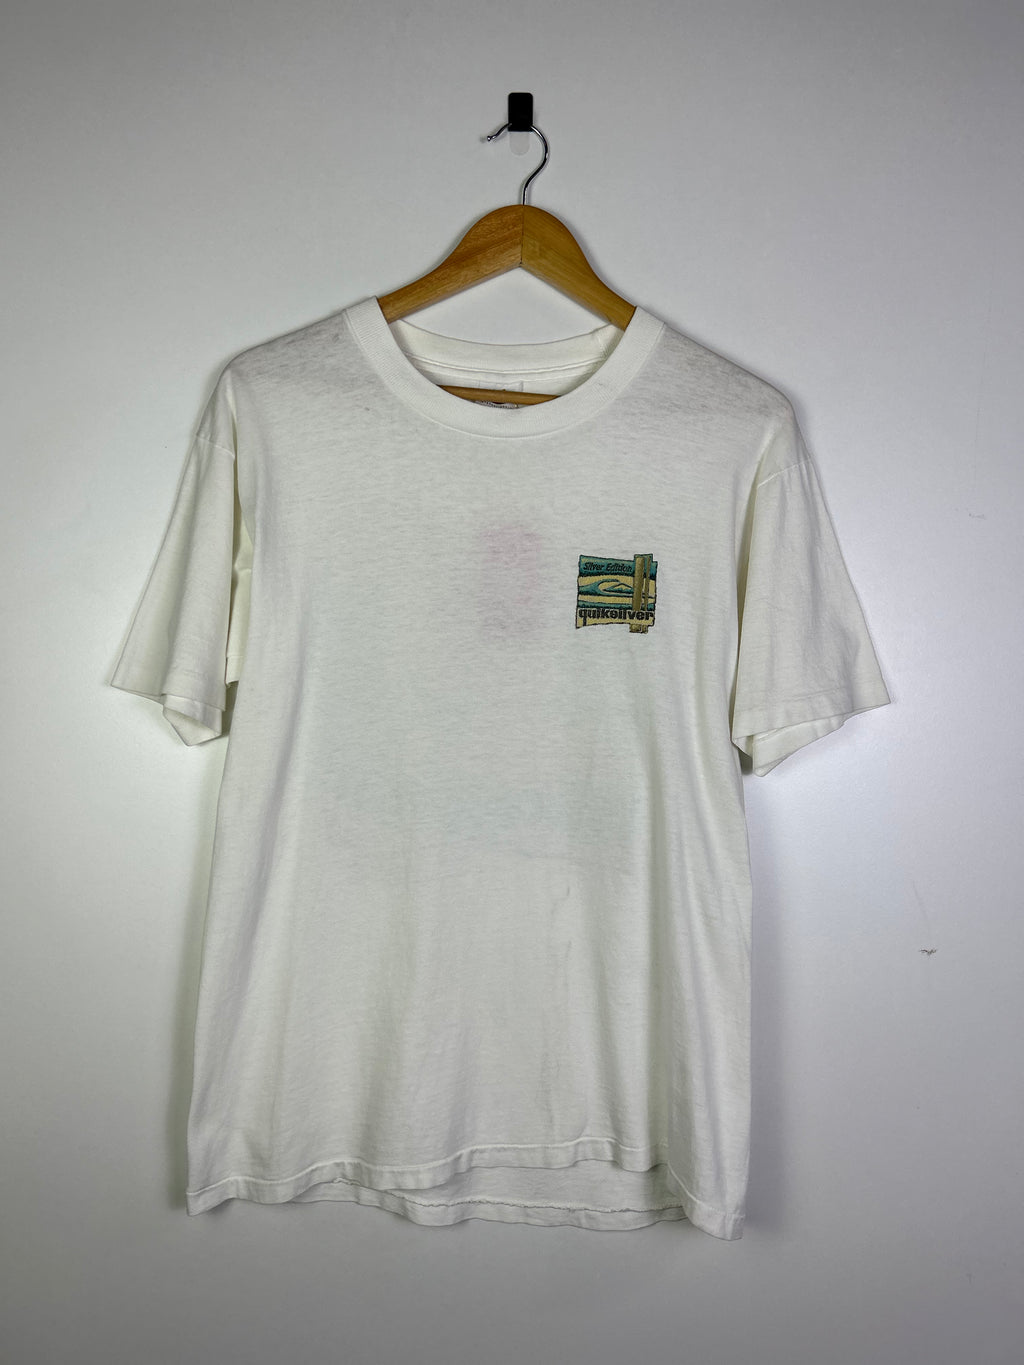 Quiksilver White Tee Silver Edition